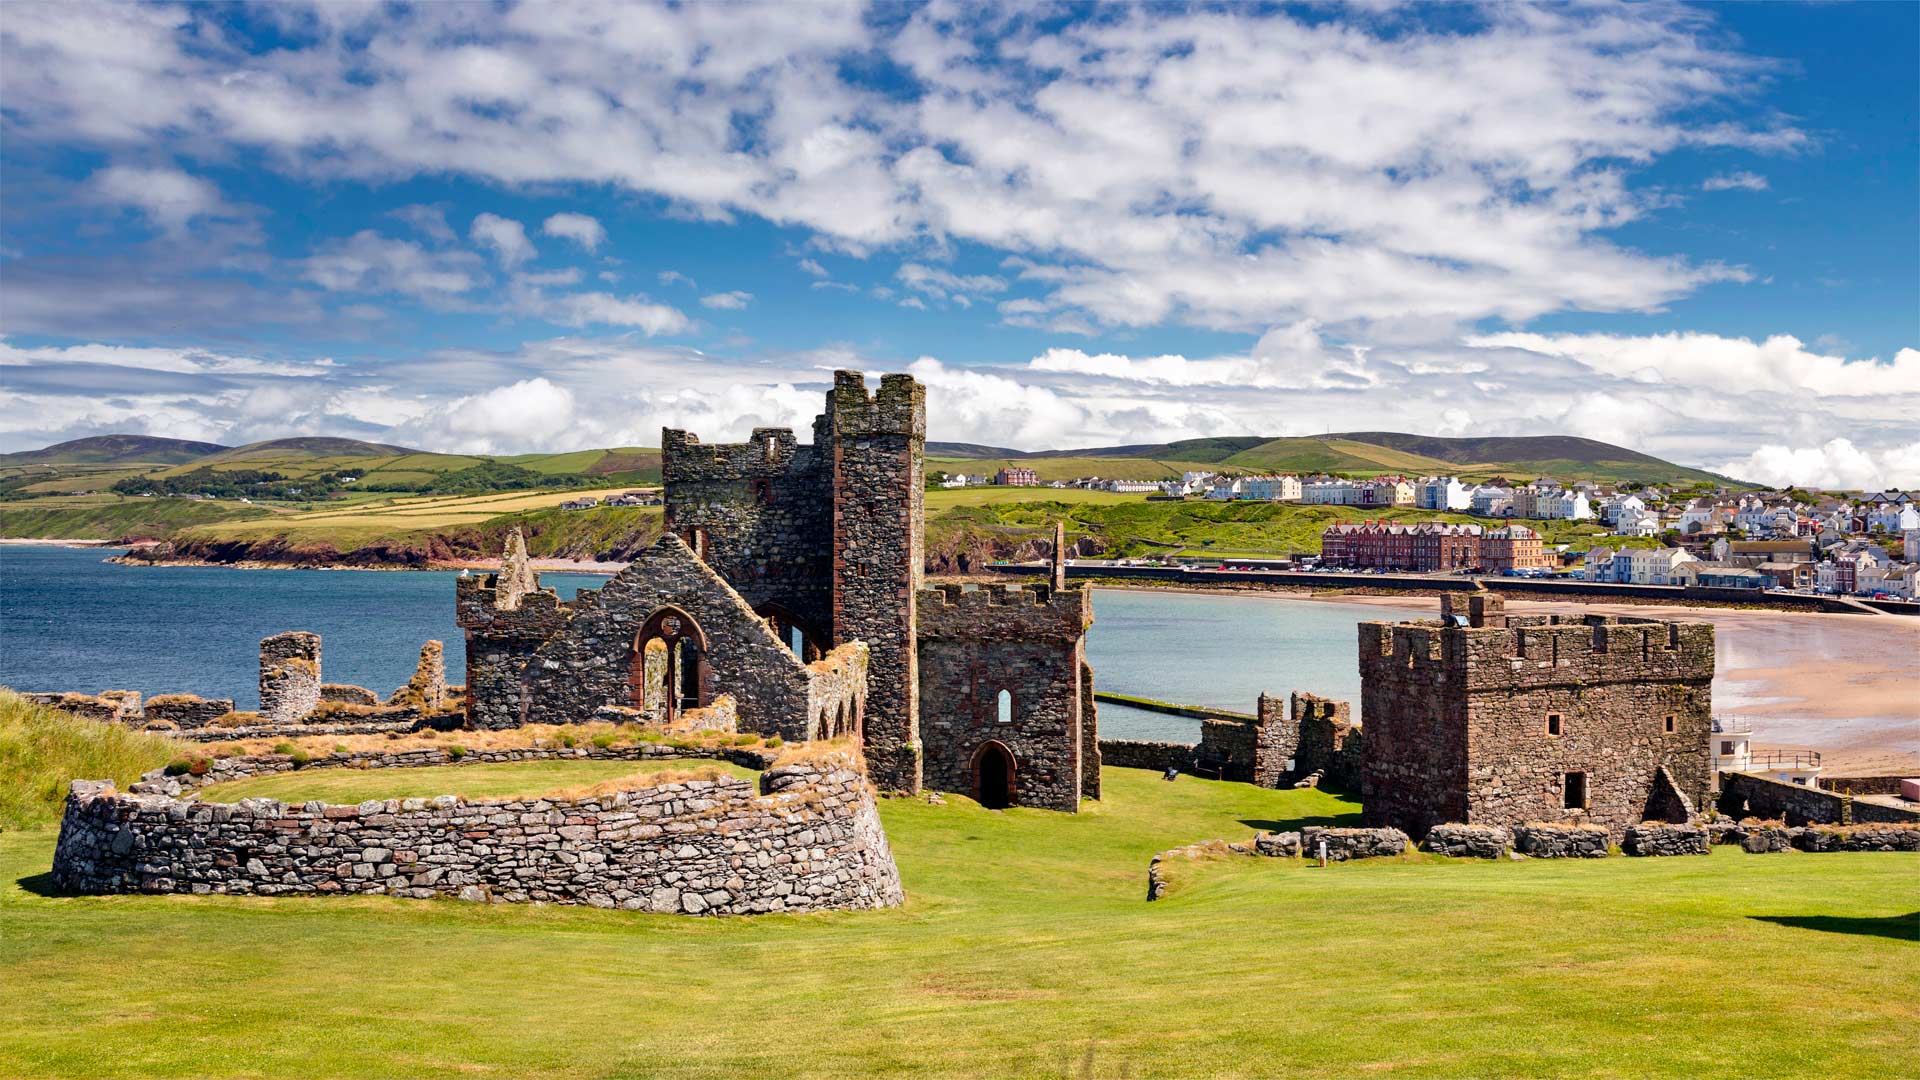 Peel Castle on St. Patrick’s Isle with the Isle of Man in the background